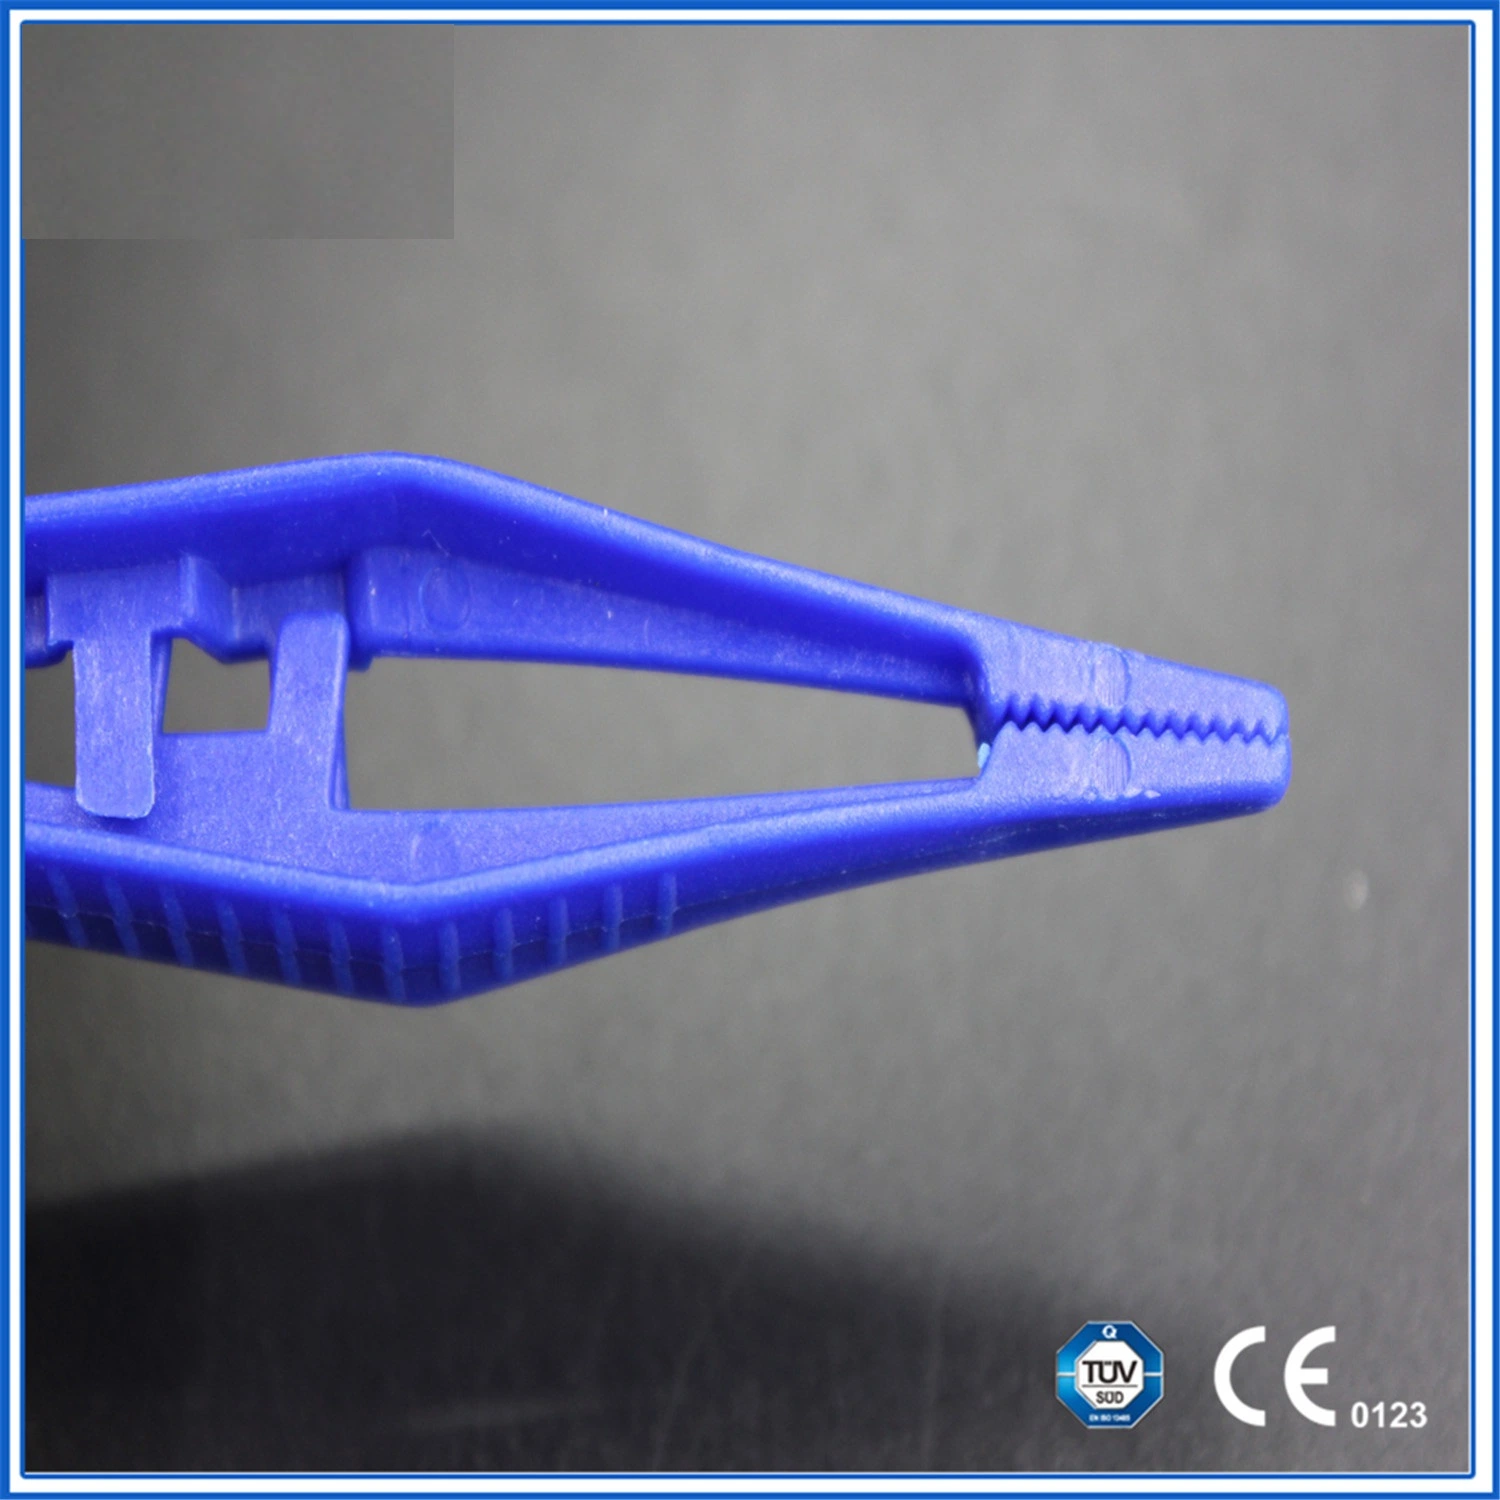 Disposable Medical Different Types of Colorful Clamp Plastic Forceps